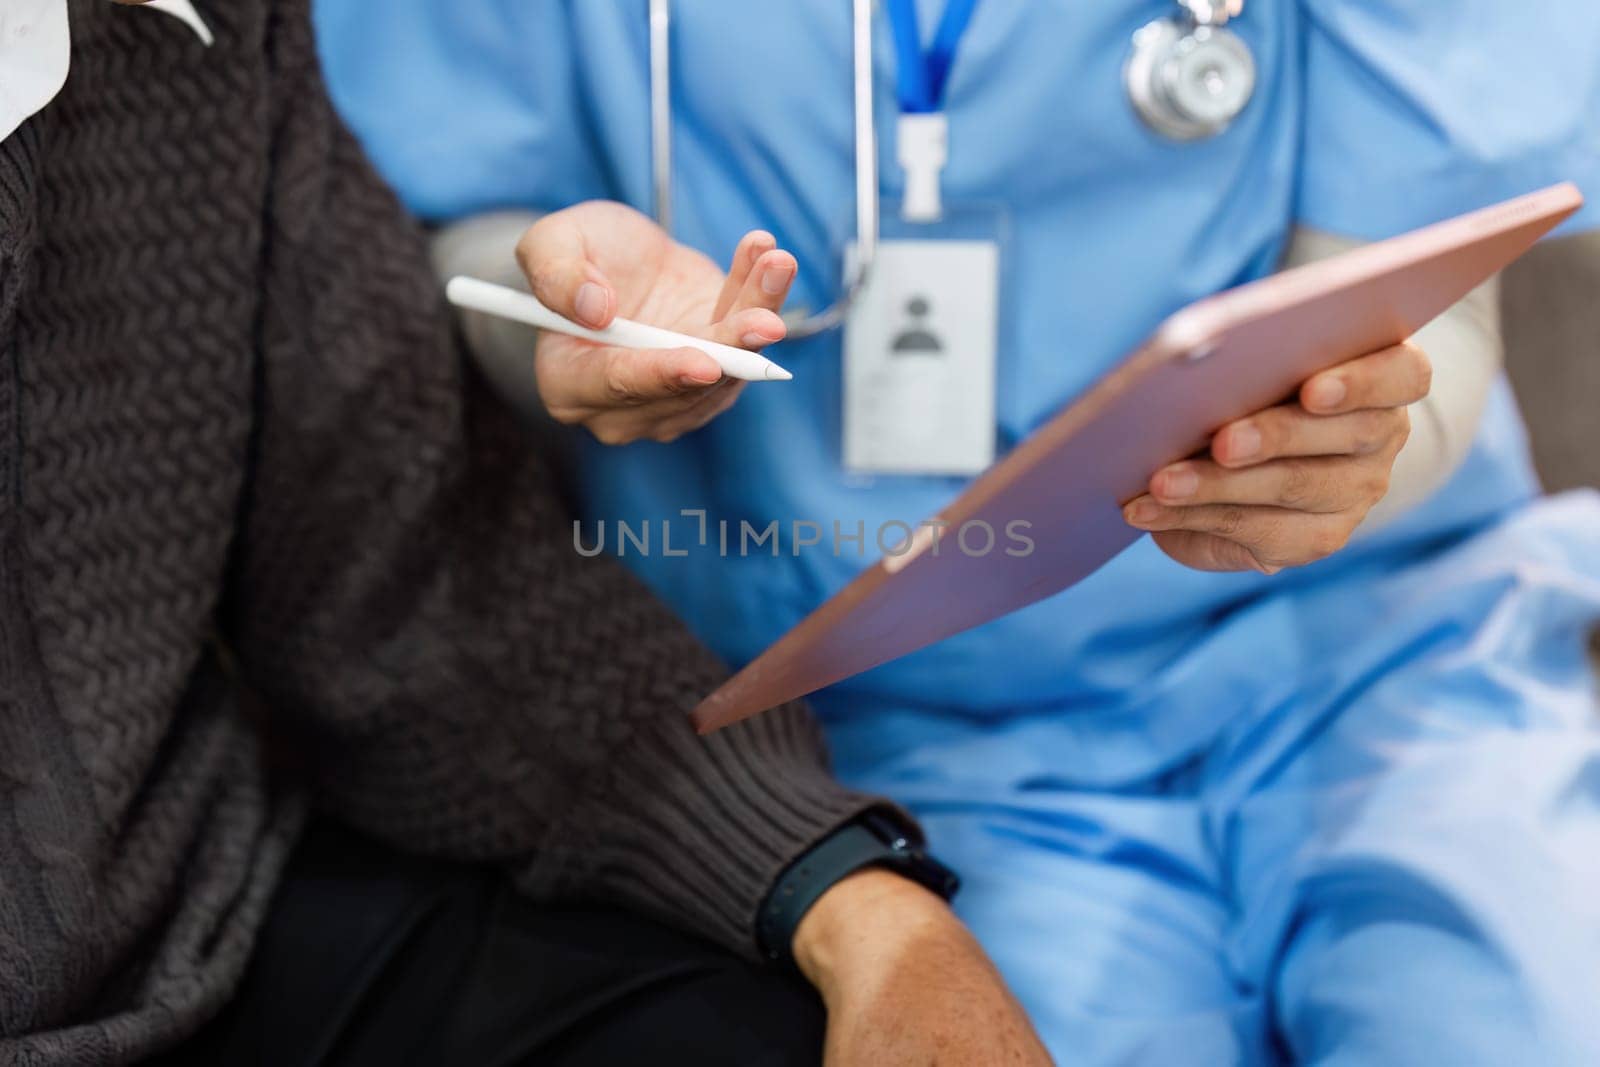 A nurse is talking to an older man about his health. The nurse is holding a clipboard and a pen